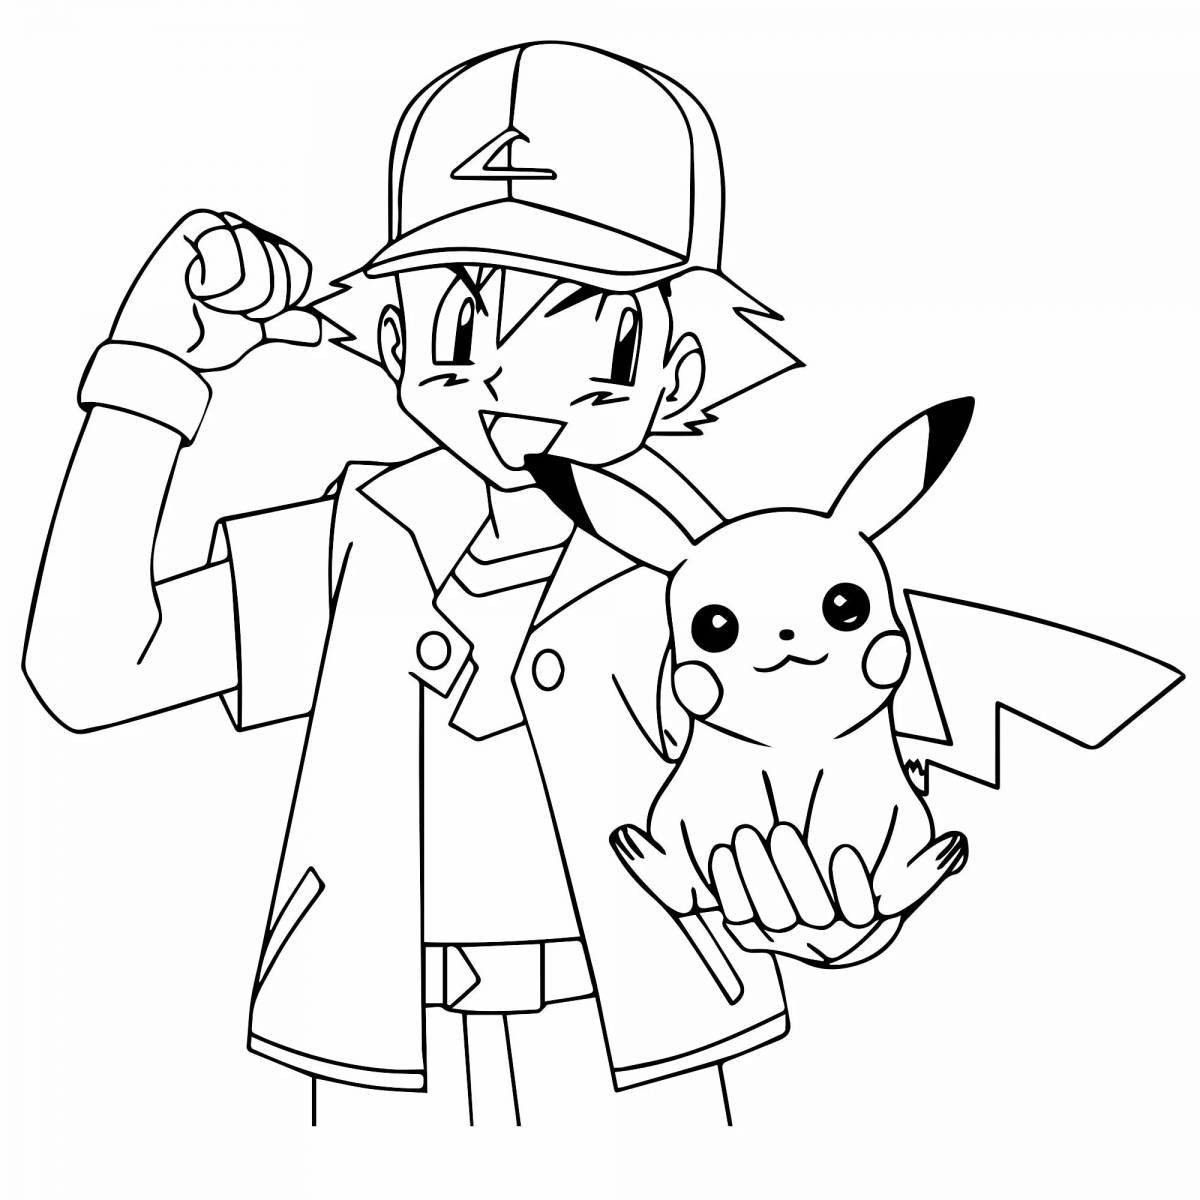 Playful coloring of pikachu in a cap